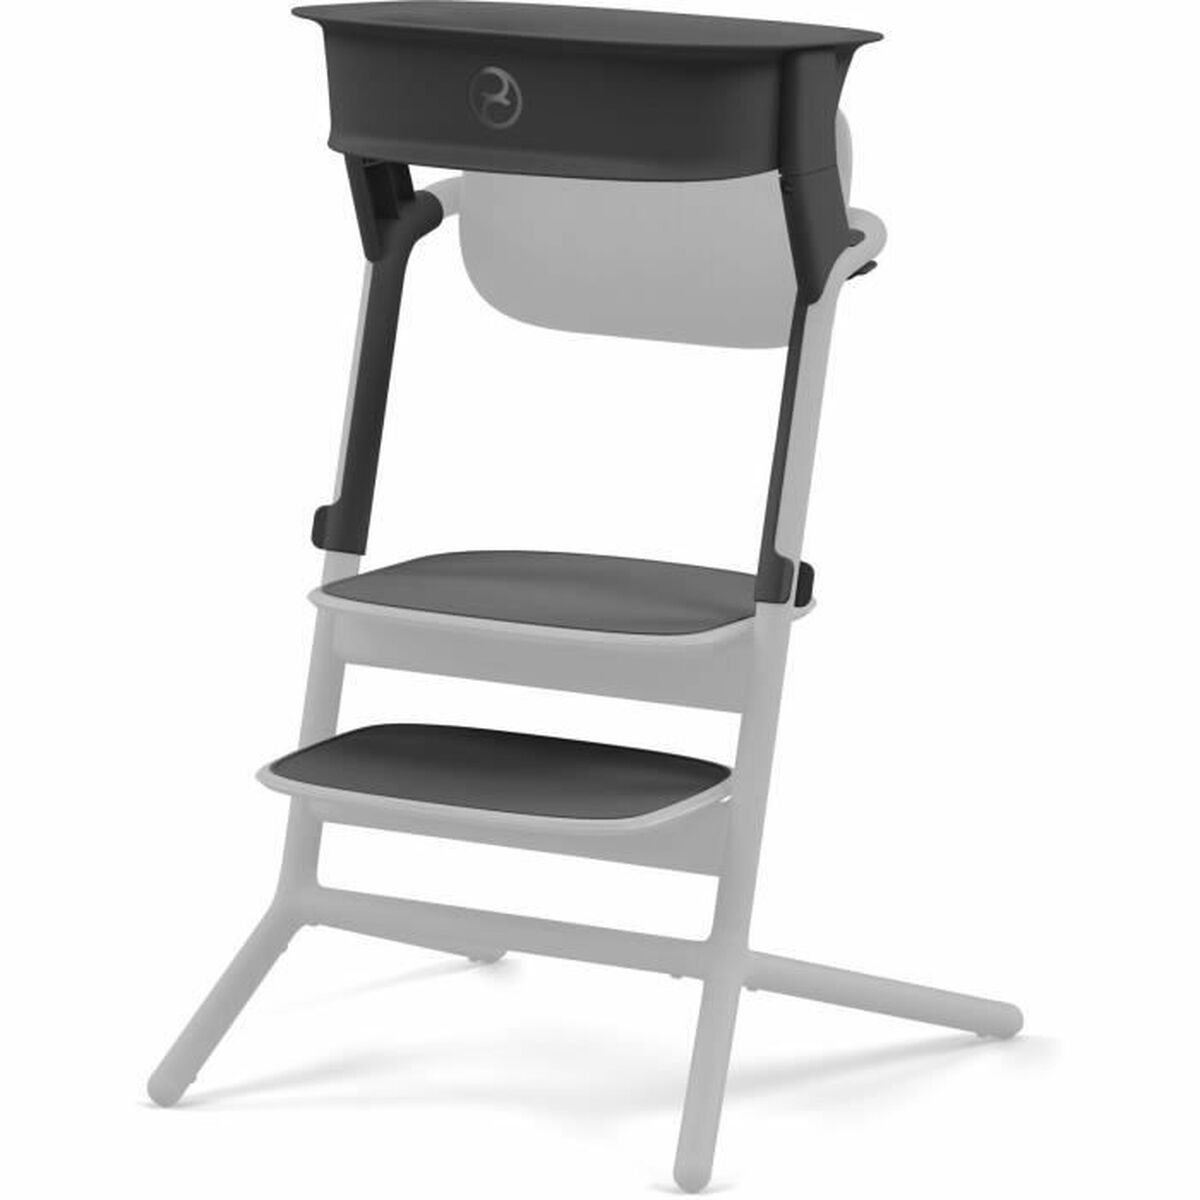 Child's Chair Cybex Lemo Learning Tower Sort